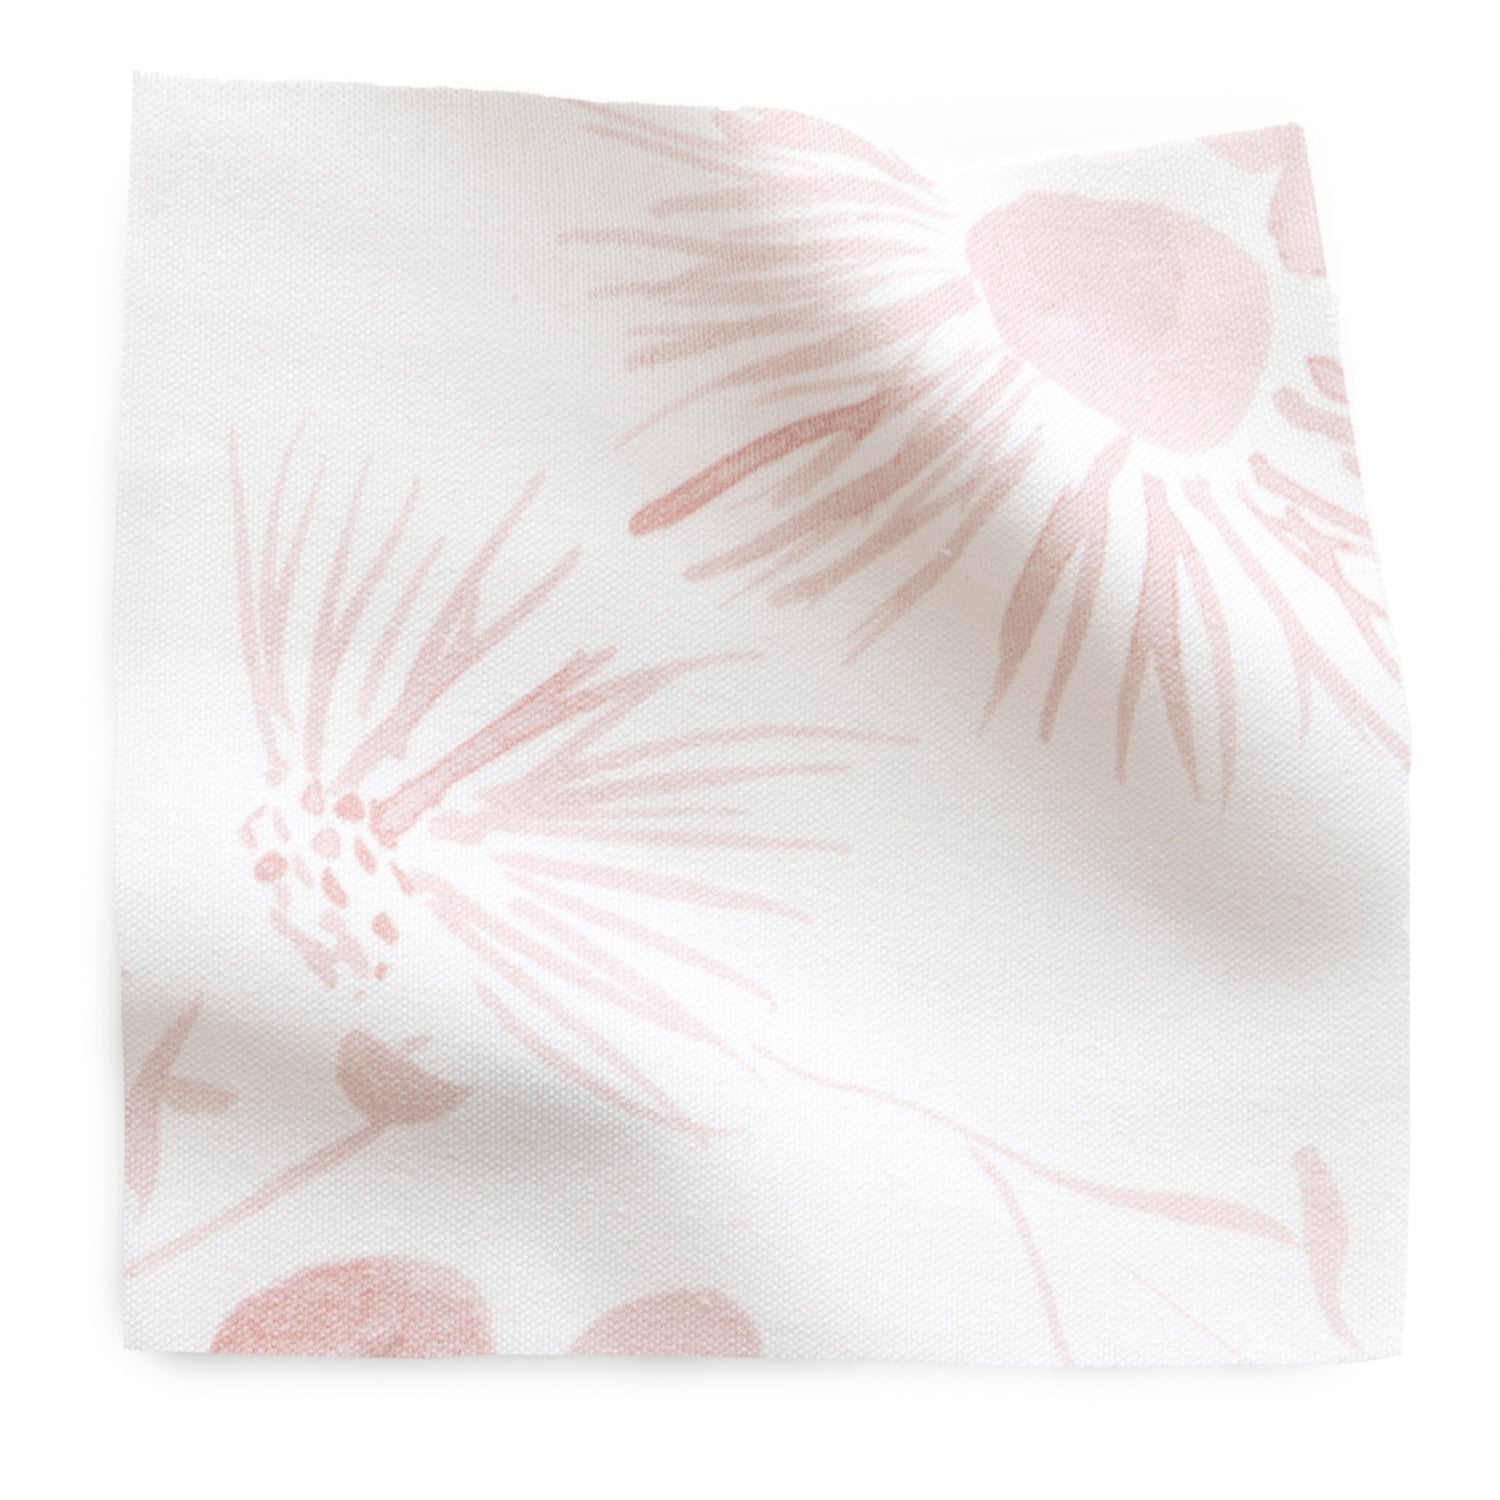 Shop Pink Floral Fabric Swatch - Pepper Home